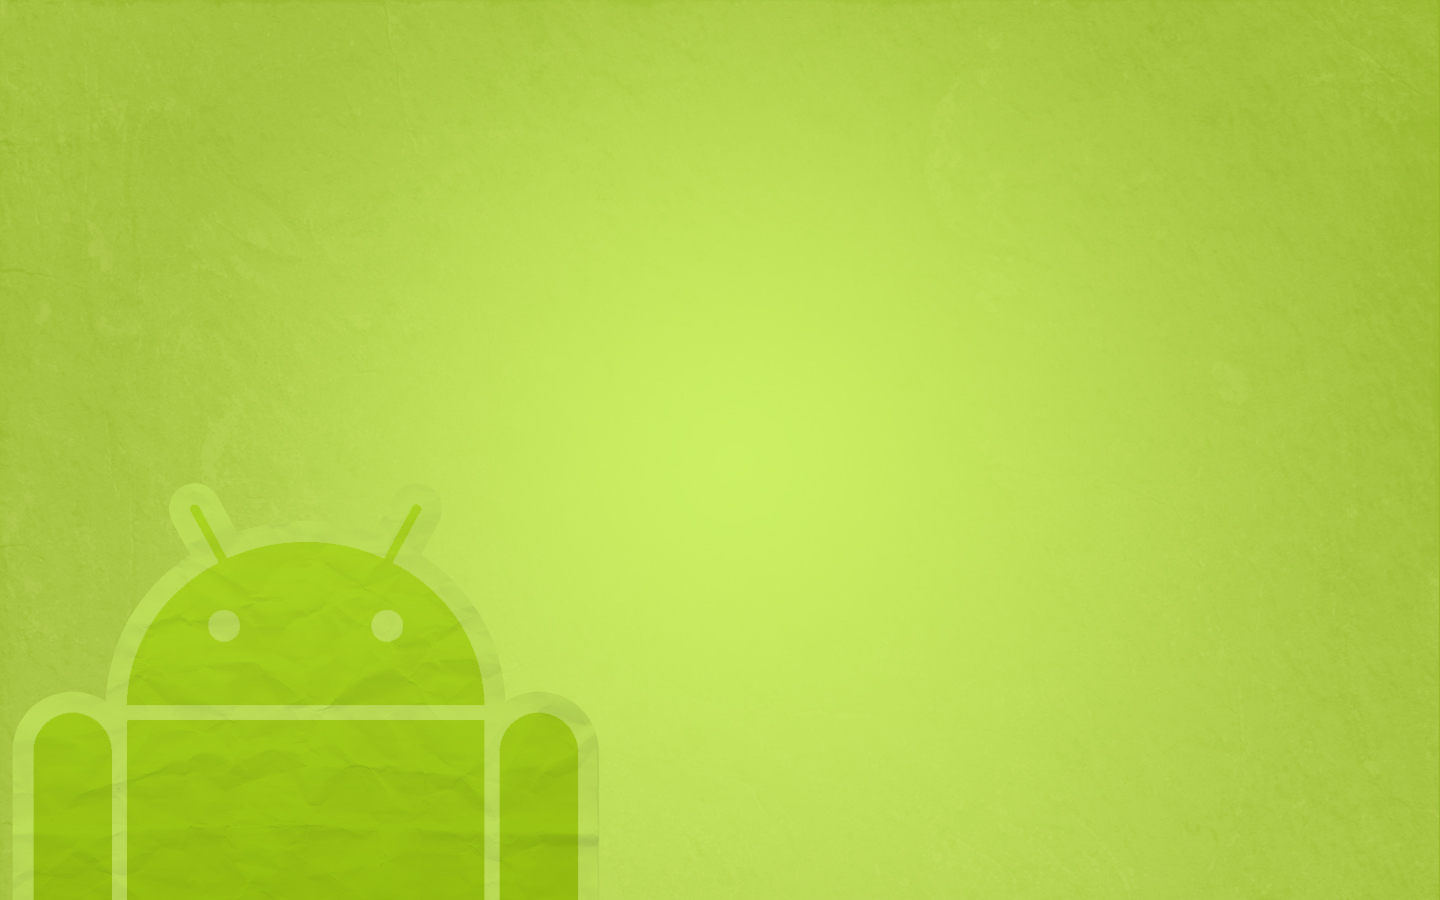 free wallpaper backgrounds for android,green,yellow,illustration,wallpaper